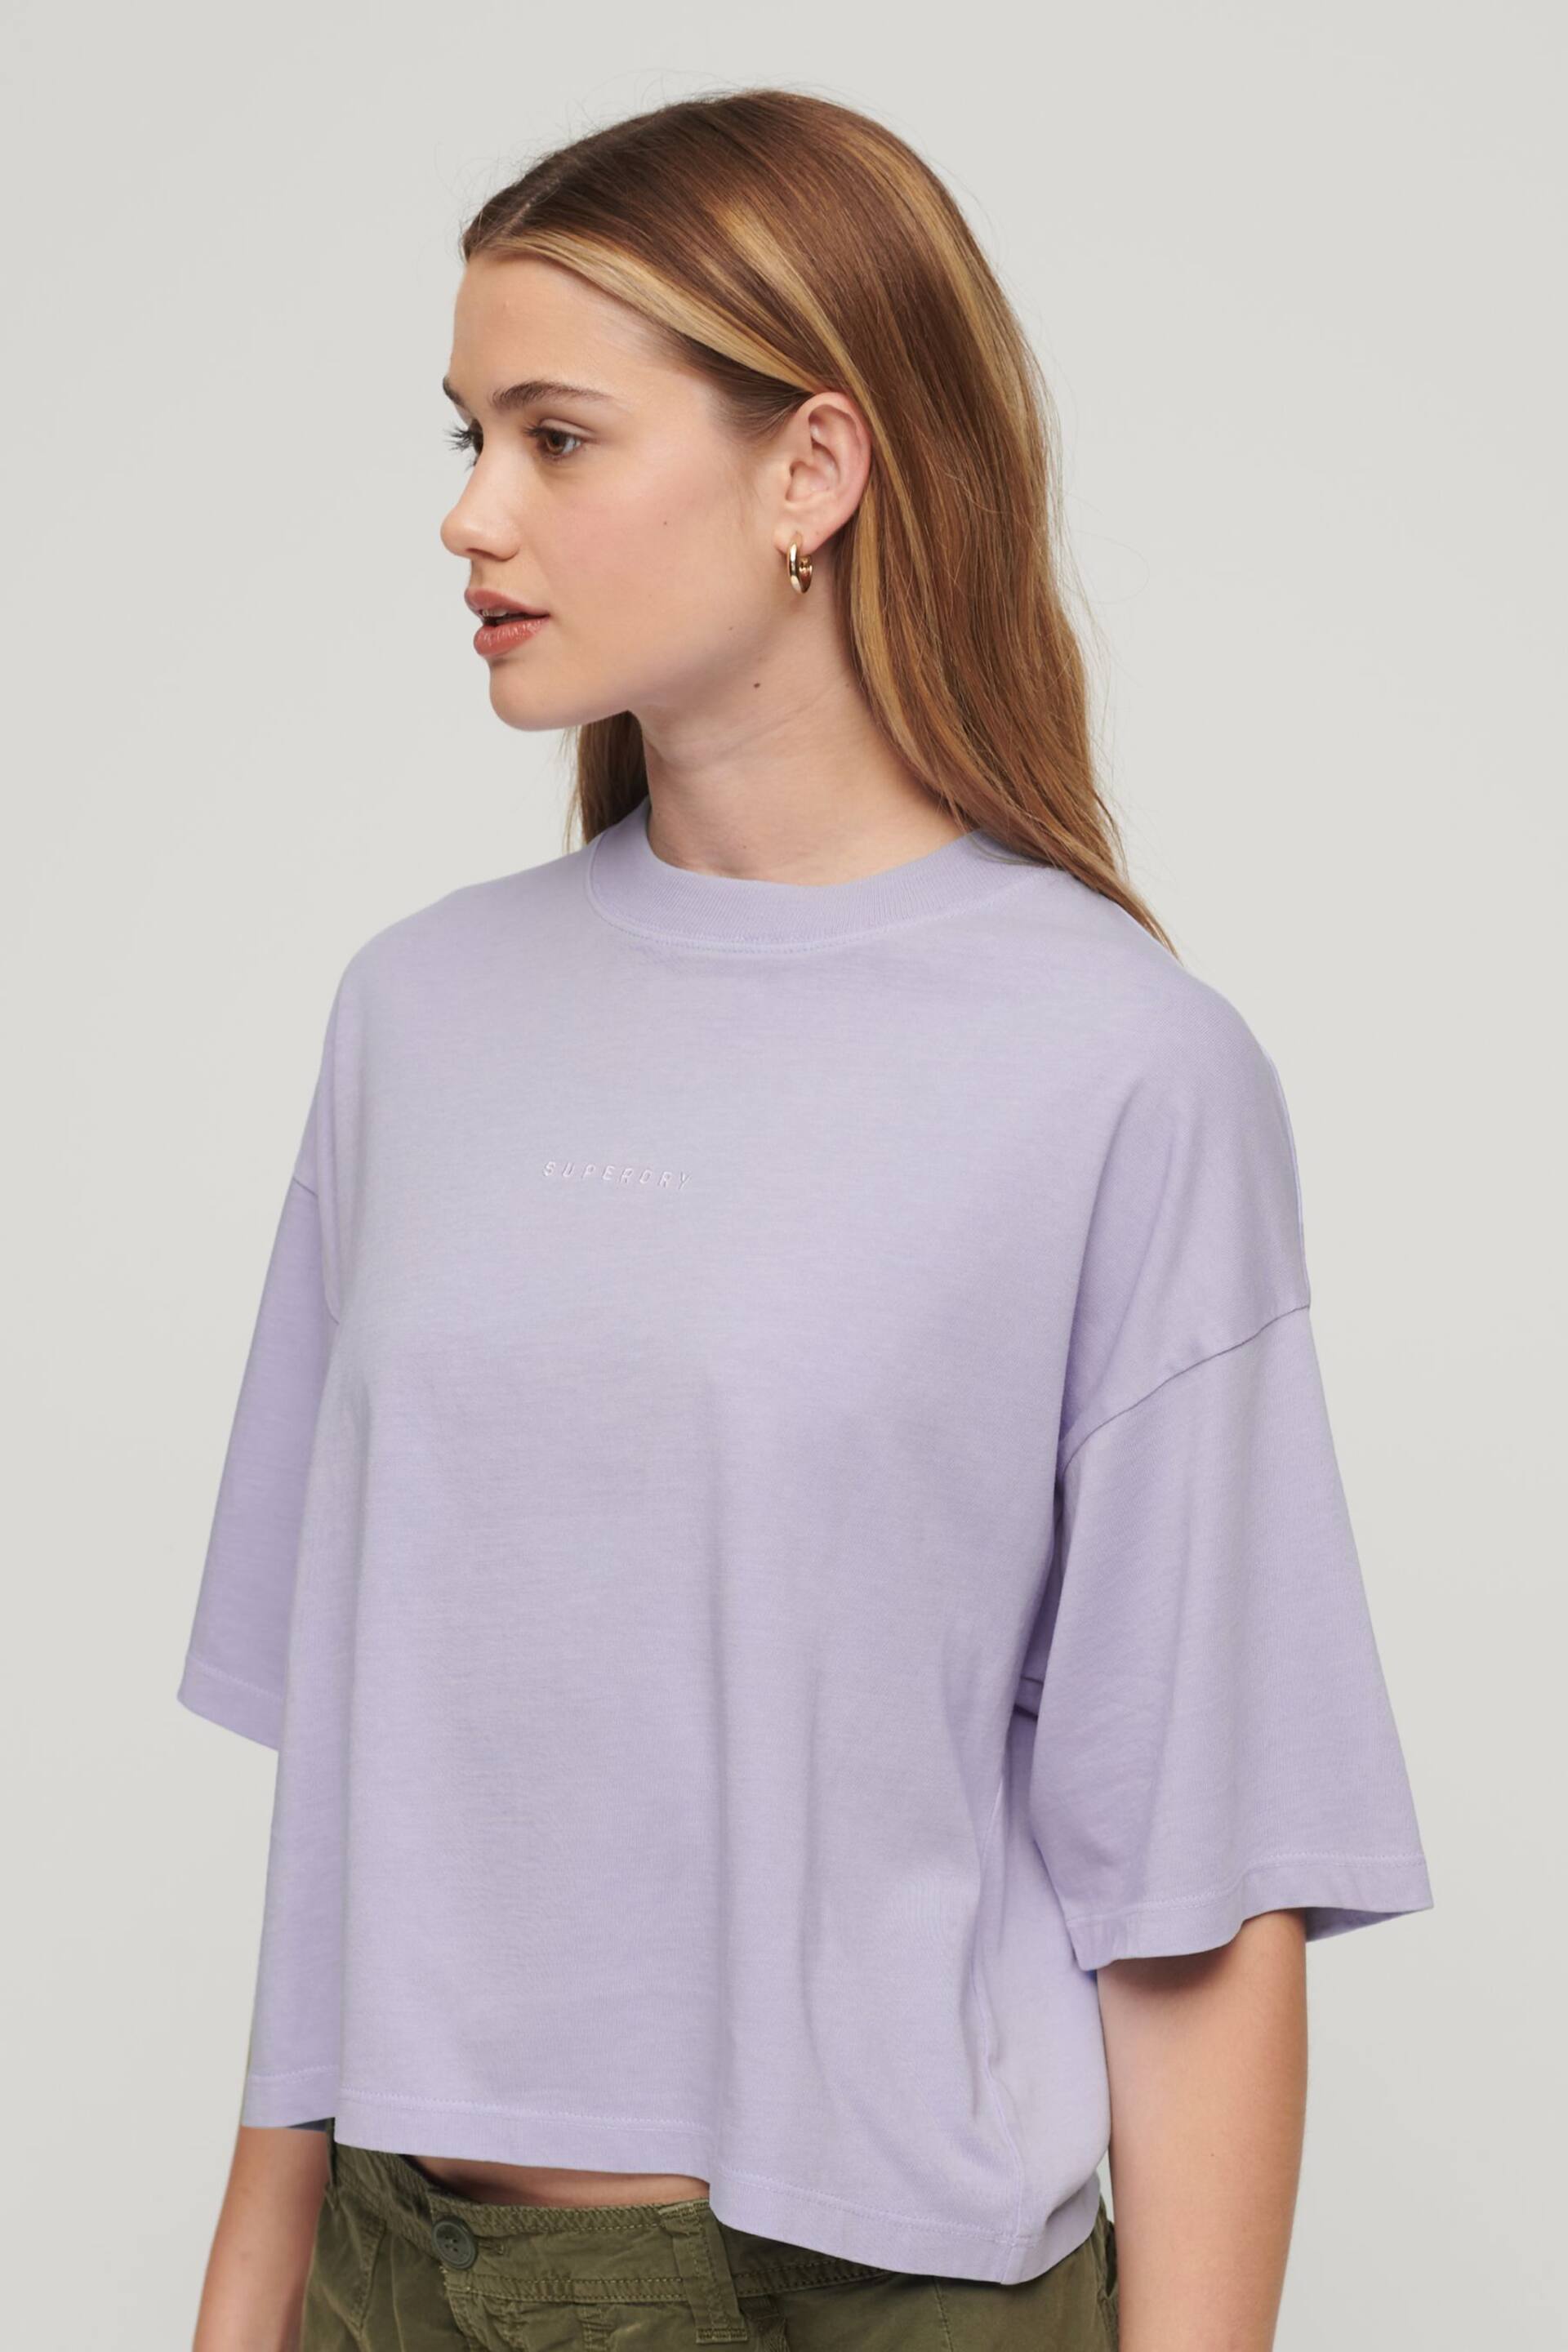 Superdry Purple Micro Logo Embroidered Boxy T-Shirt - Image 2 of 5